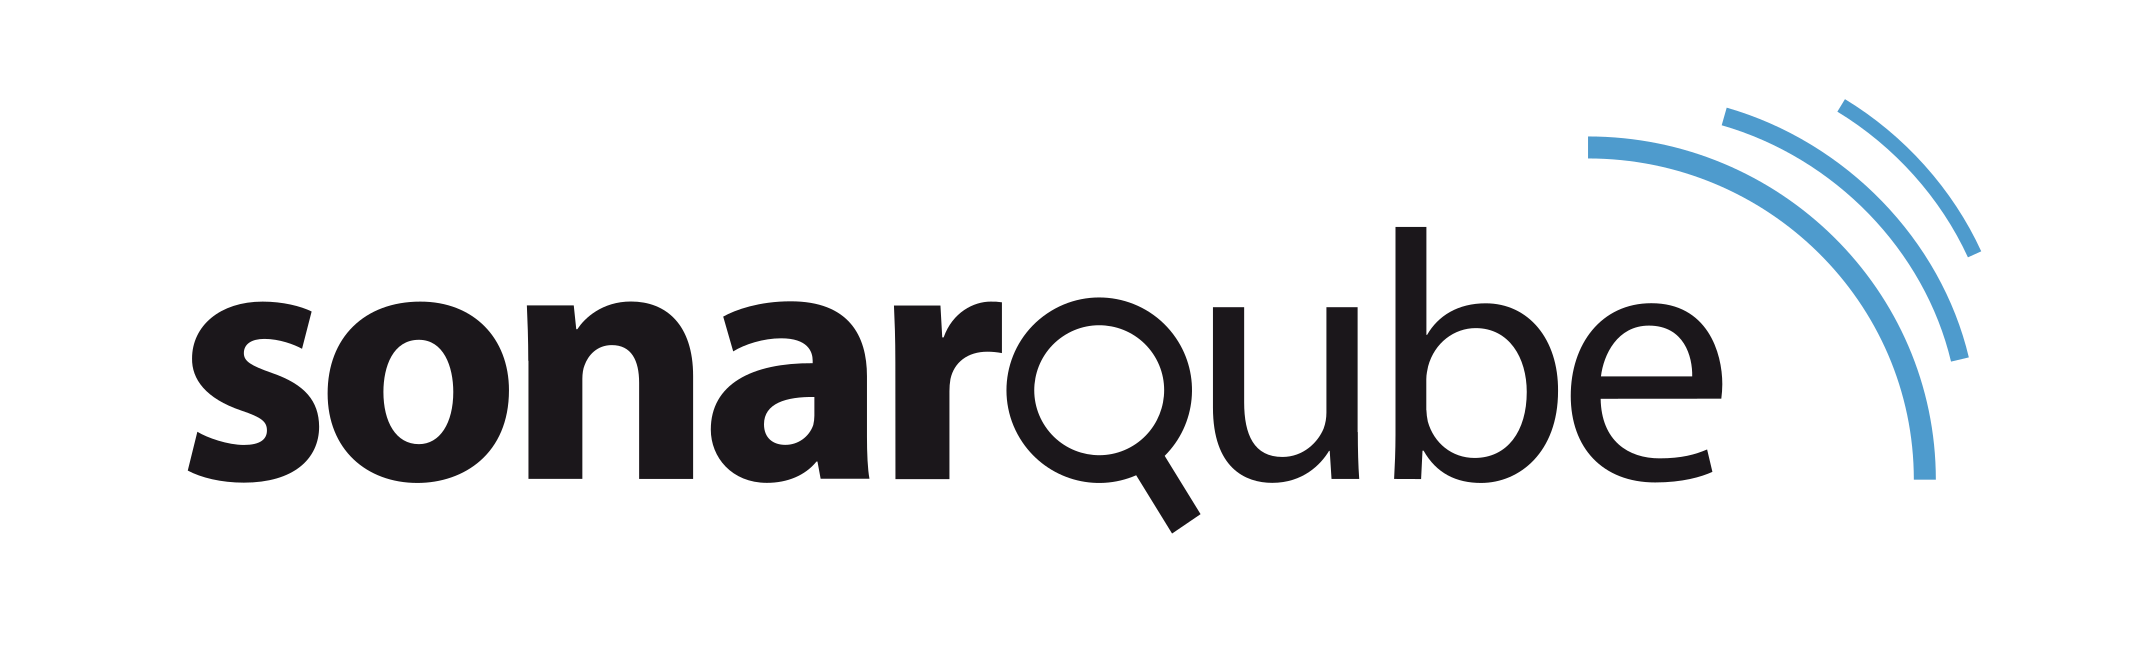 Code Quality and Code Security on-premise with SonarQube